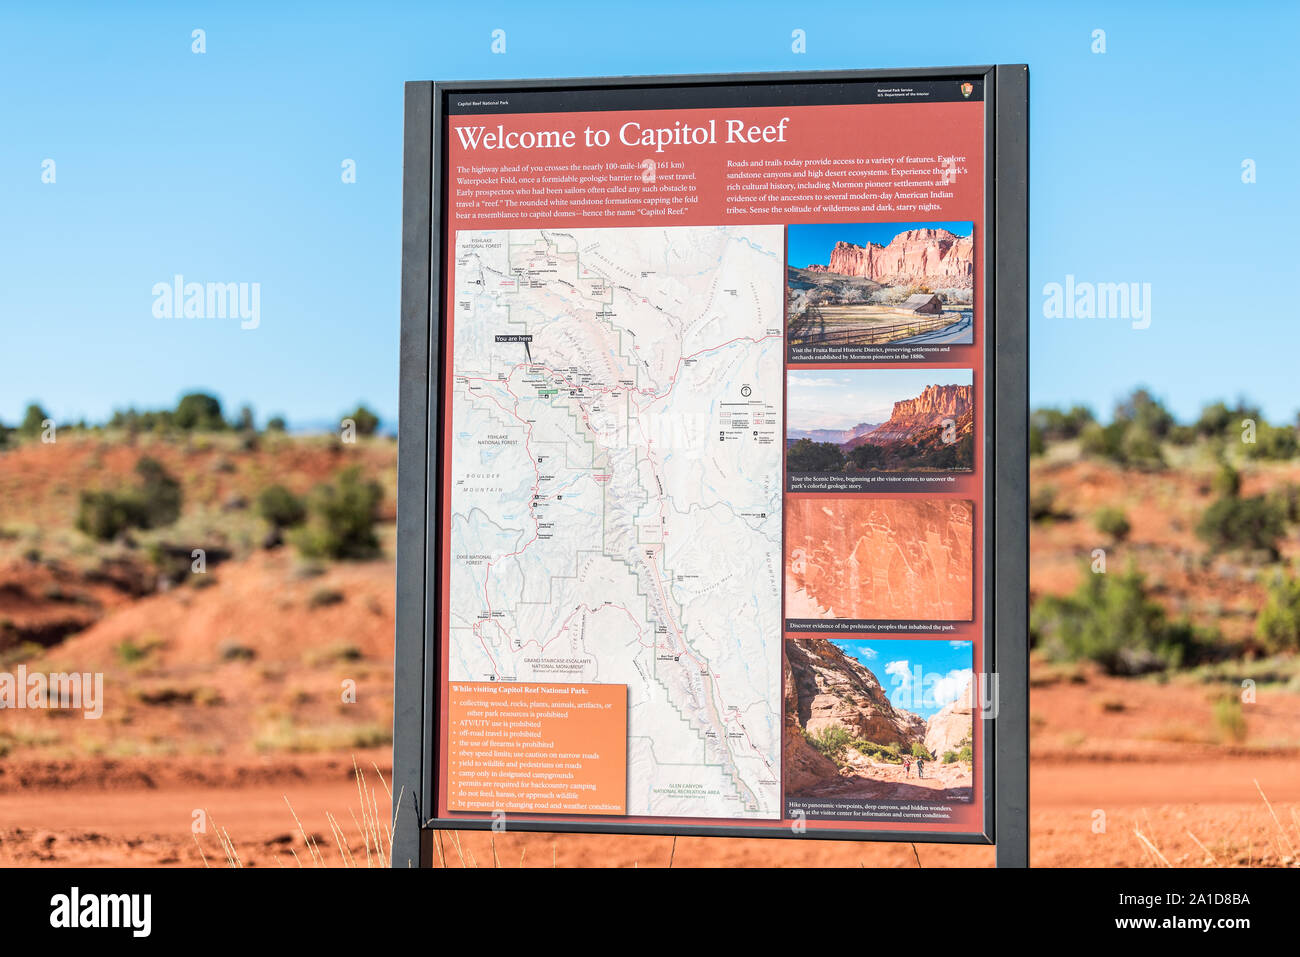 Fruita, USA - August 1, 2019: Welcome sign in Capitol Reef National Monument in summer with map and guide Stock Photo